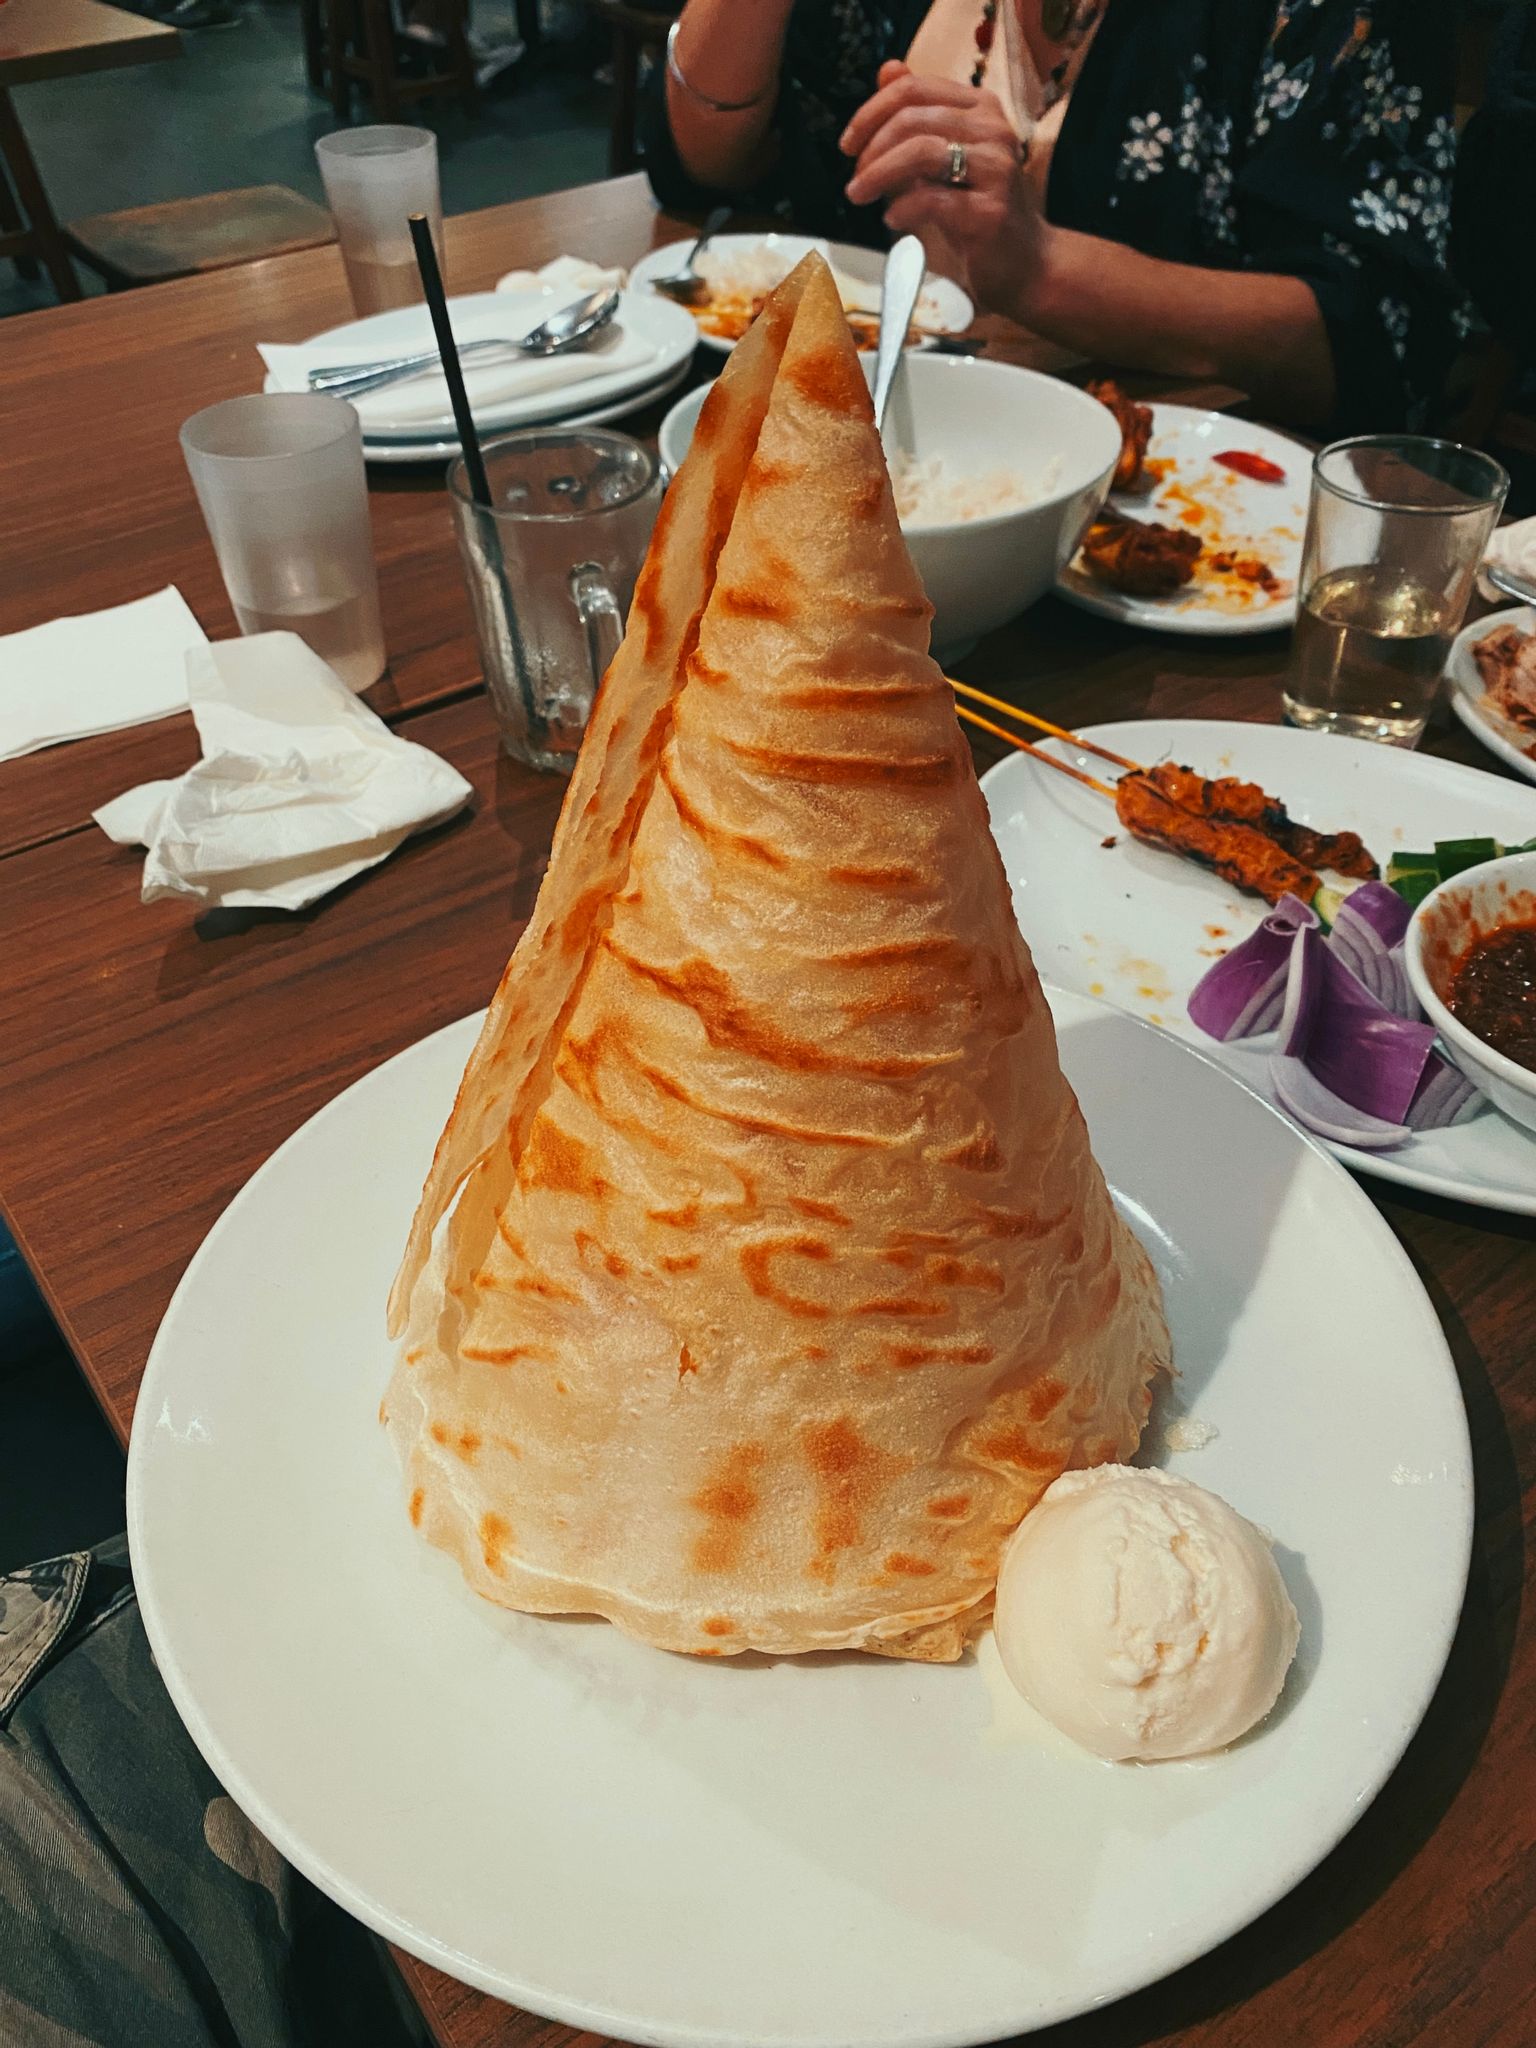 A photo of a roti tisu, which is a tall cone-shaped dessert roti that's covered in sugar and butter and is AMAZING.